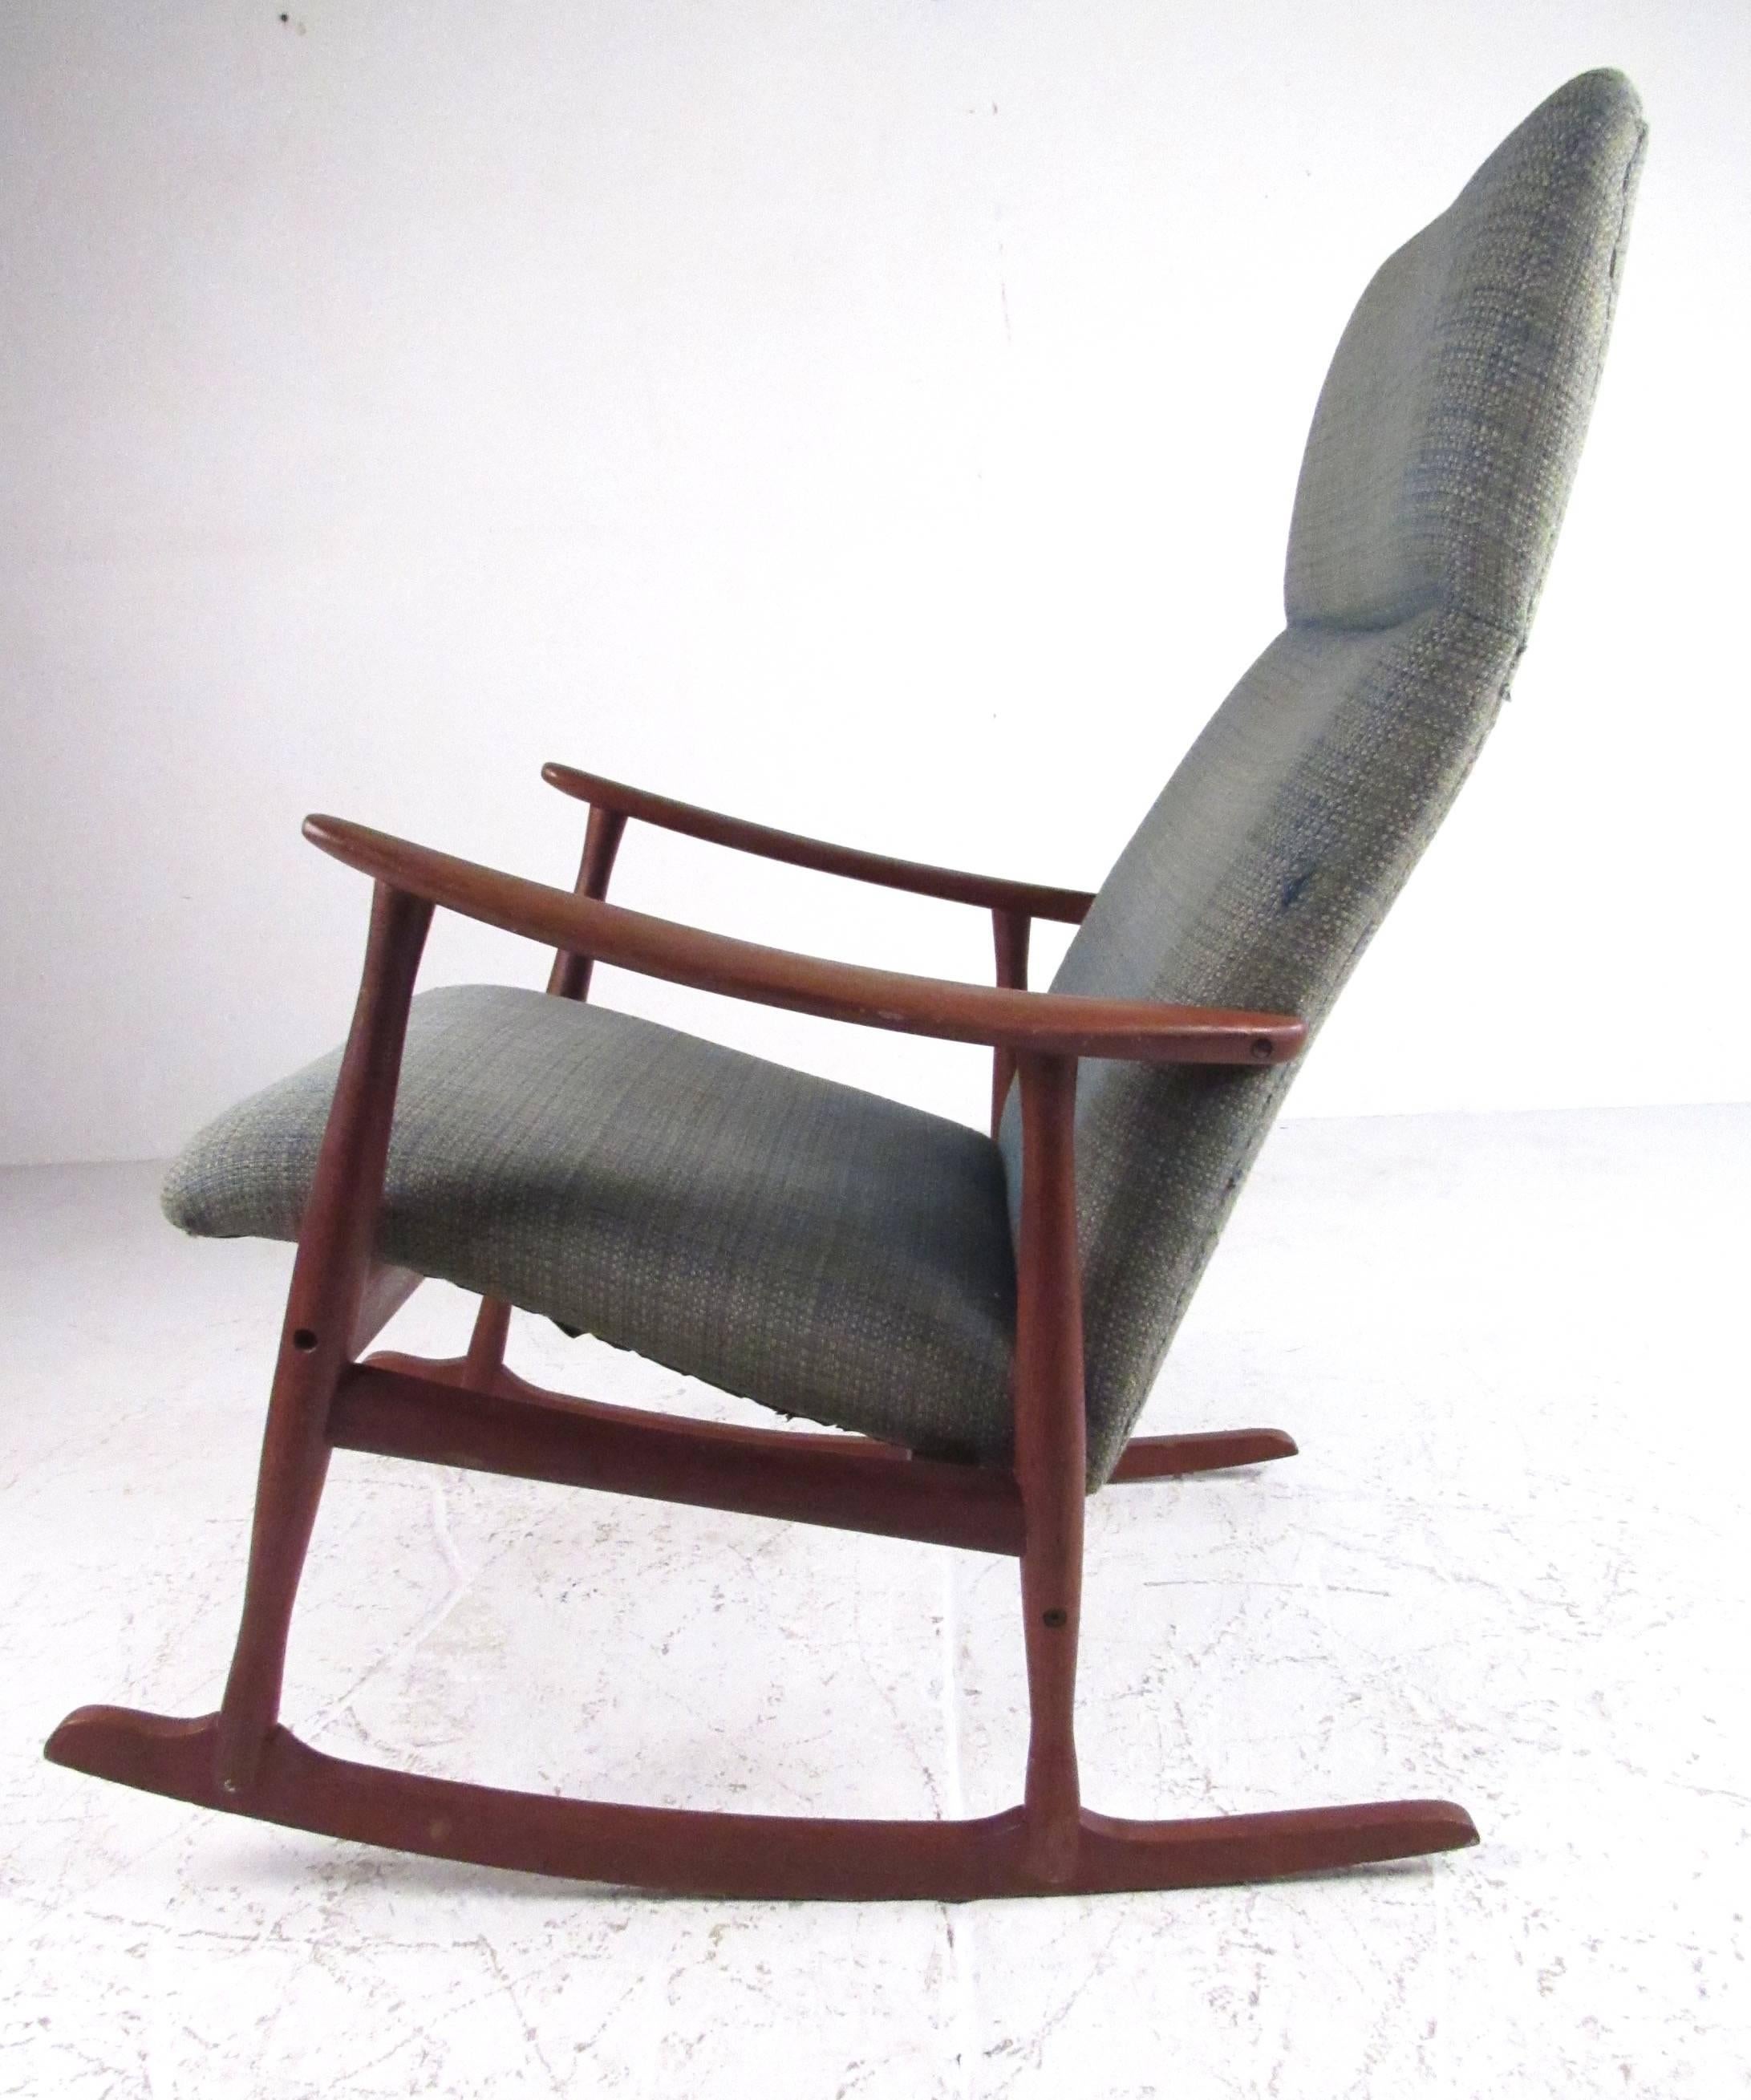 Vintage rocking chair with midcentury styling from Denmark, circa 1960. Very comfortable with solid teak construction, this Classic Danish design fits easily into any residential environment. Please confirm item location (NY or NJ) with dealer.